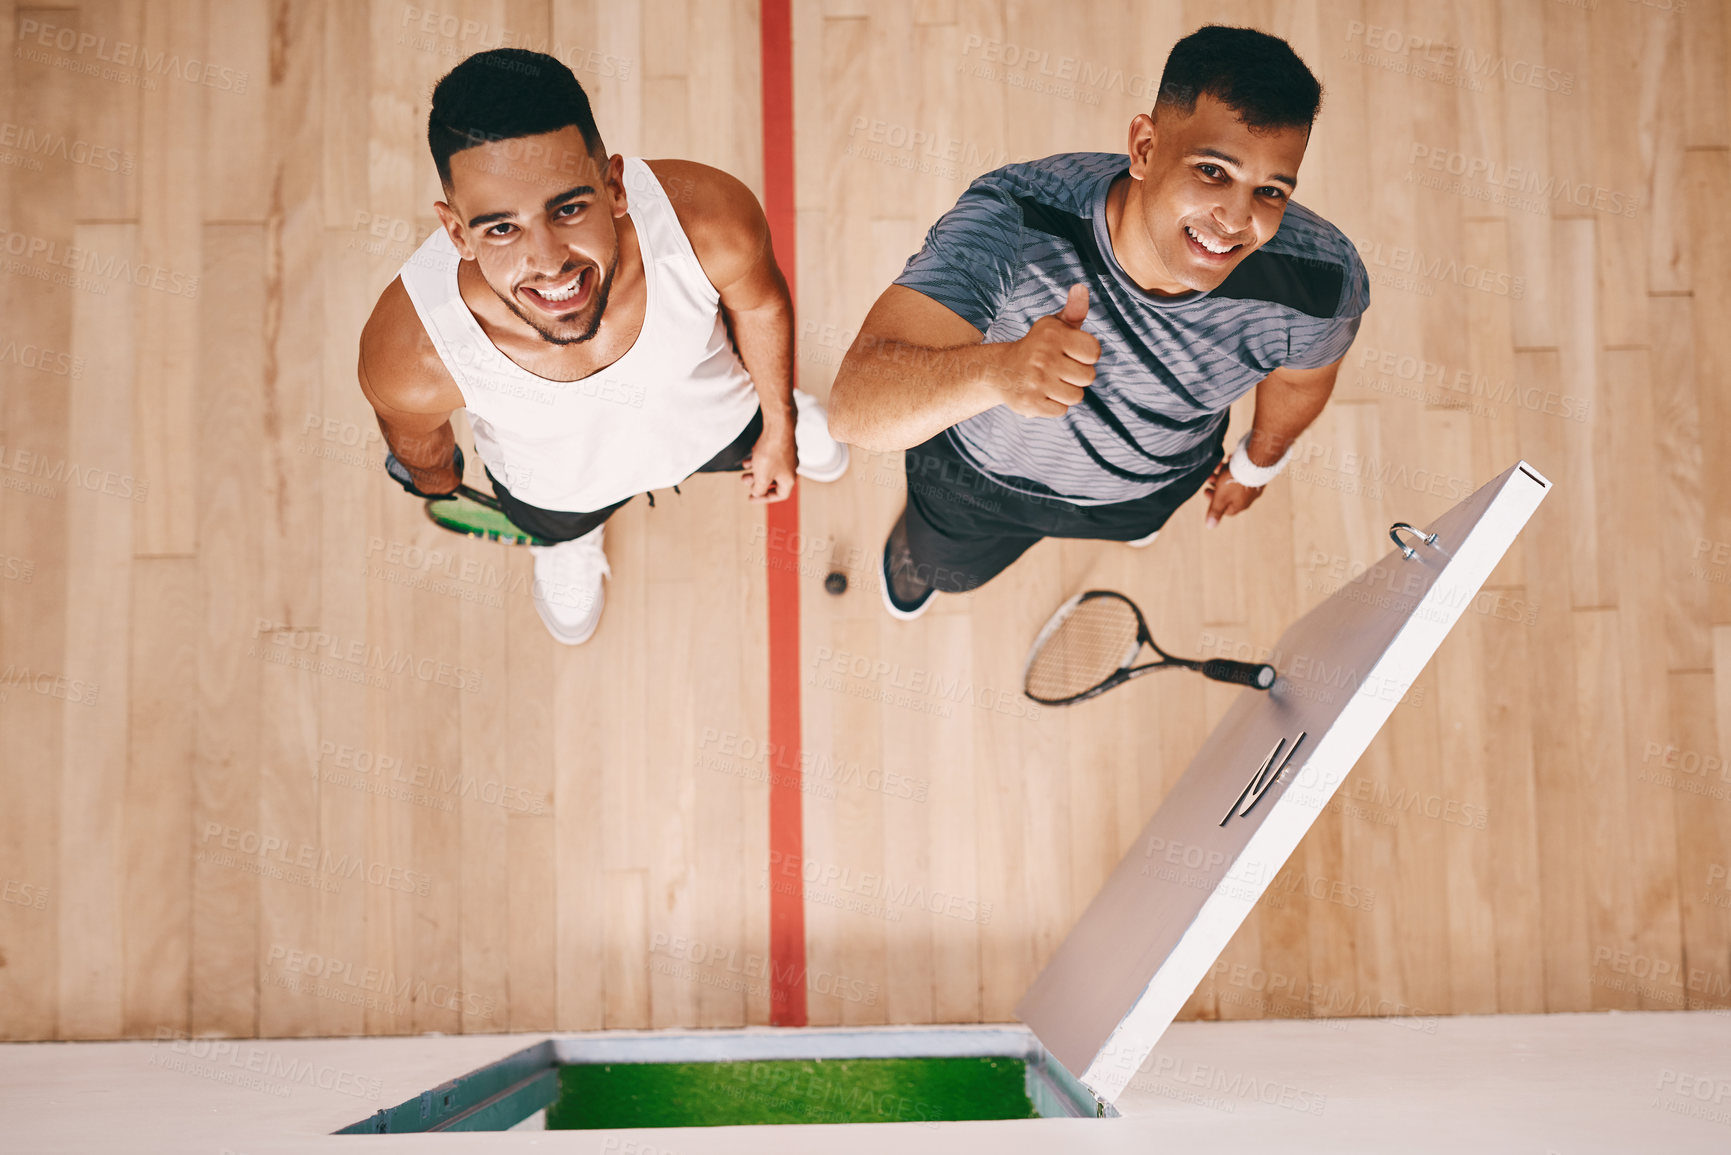 Buy stock photo High angle shot of two young men showing thumbs up at a squash court